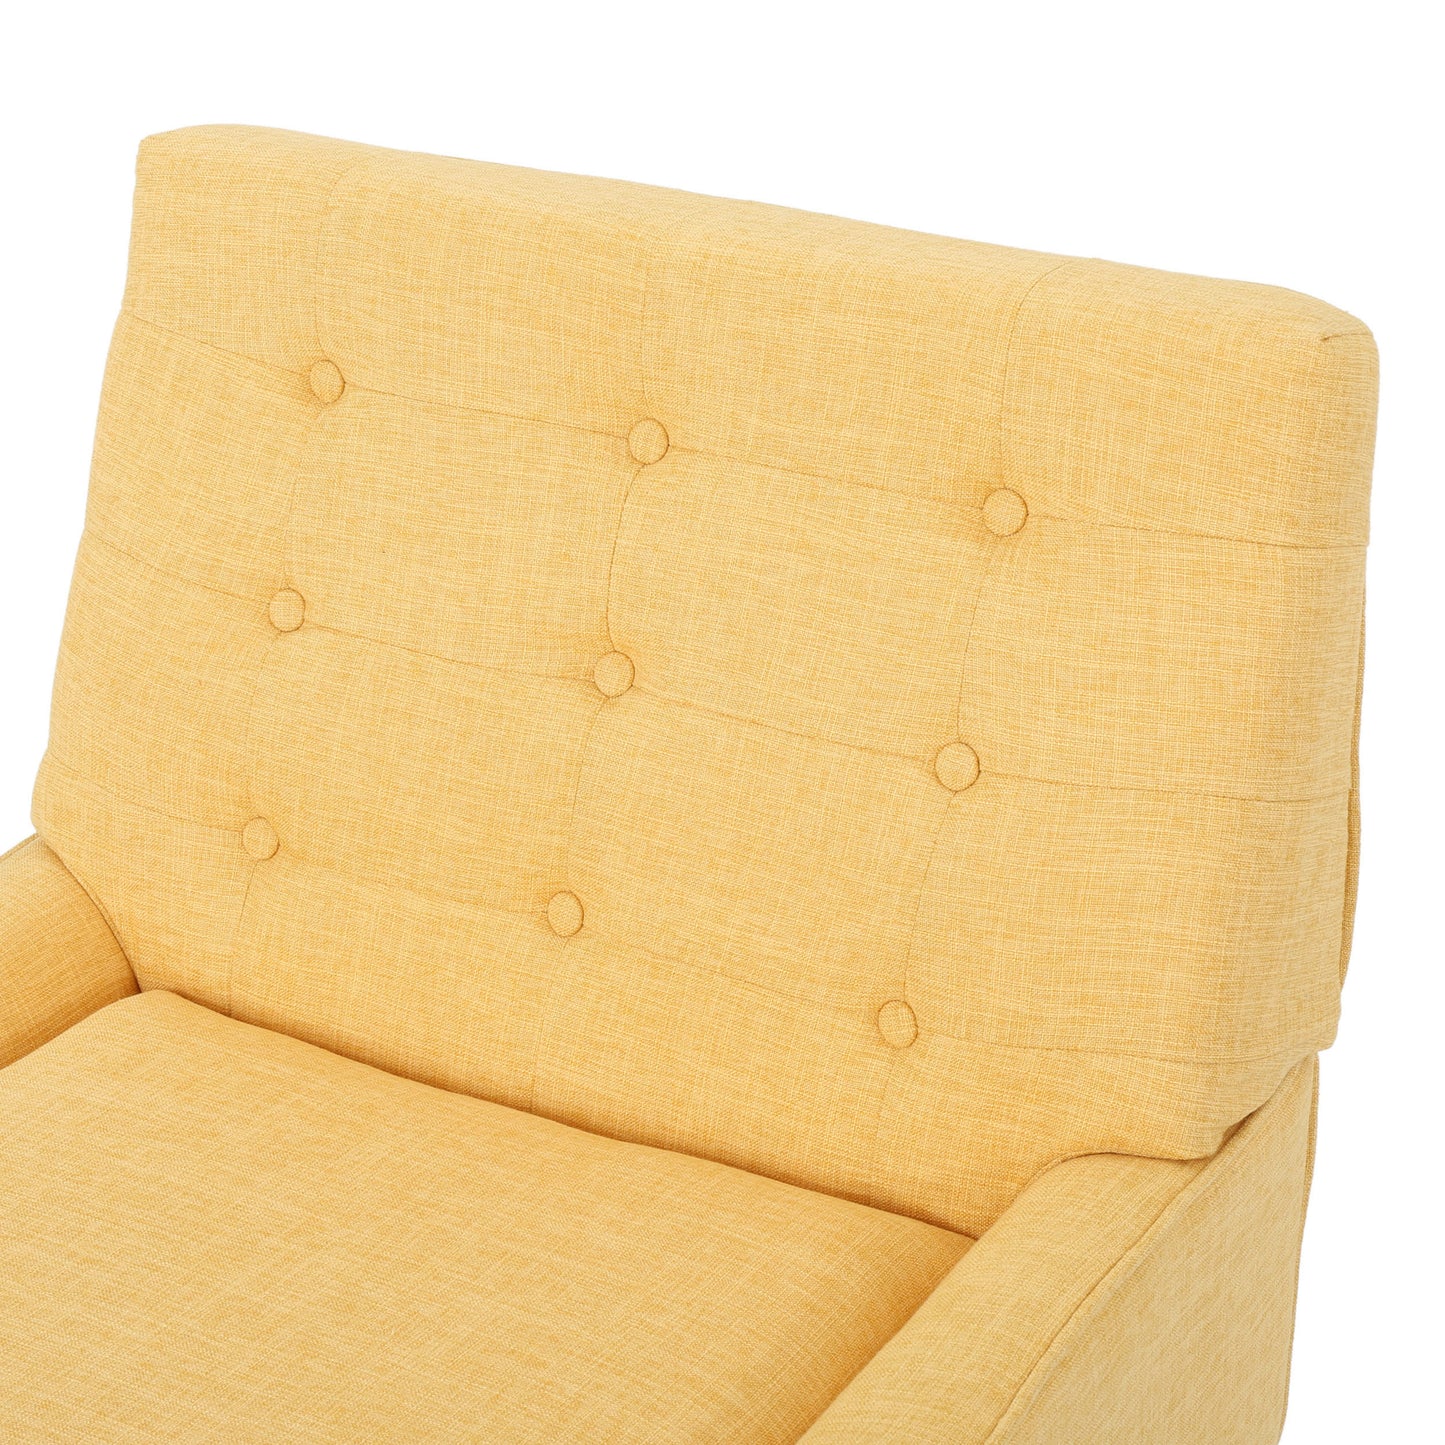 Eonna Mid-Century Modern Button Tufted Fabric Upholstered Accent Chair